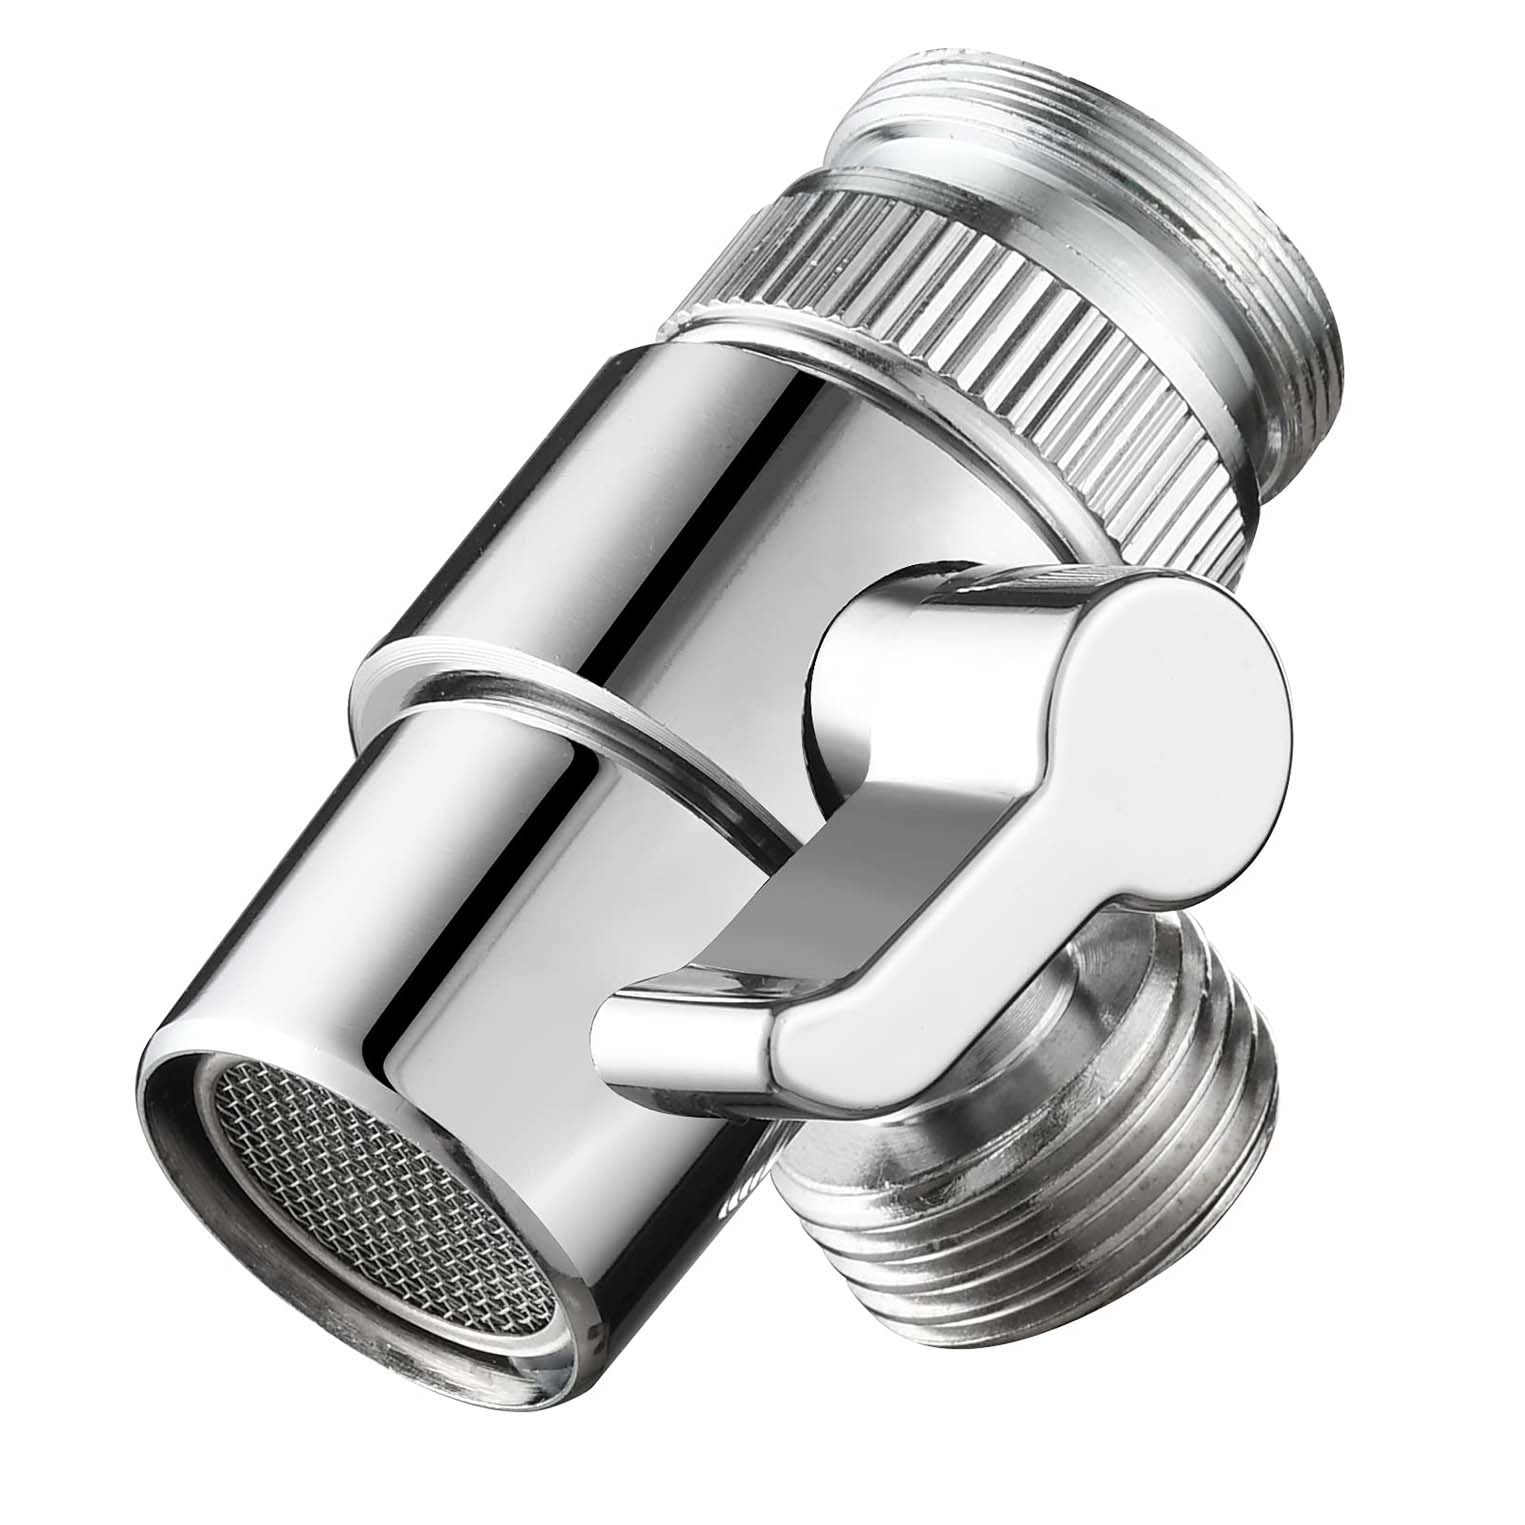 Chrome Adapter Two-Way Diverter For Kitchen And Bathroom Taps